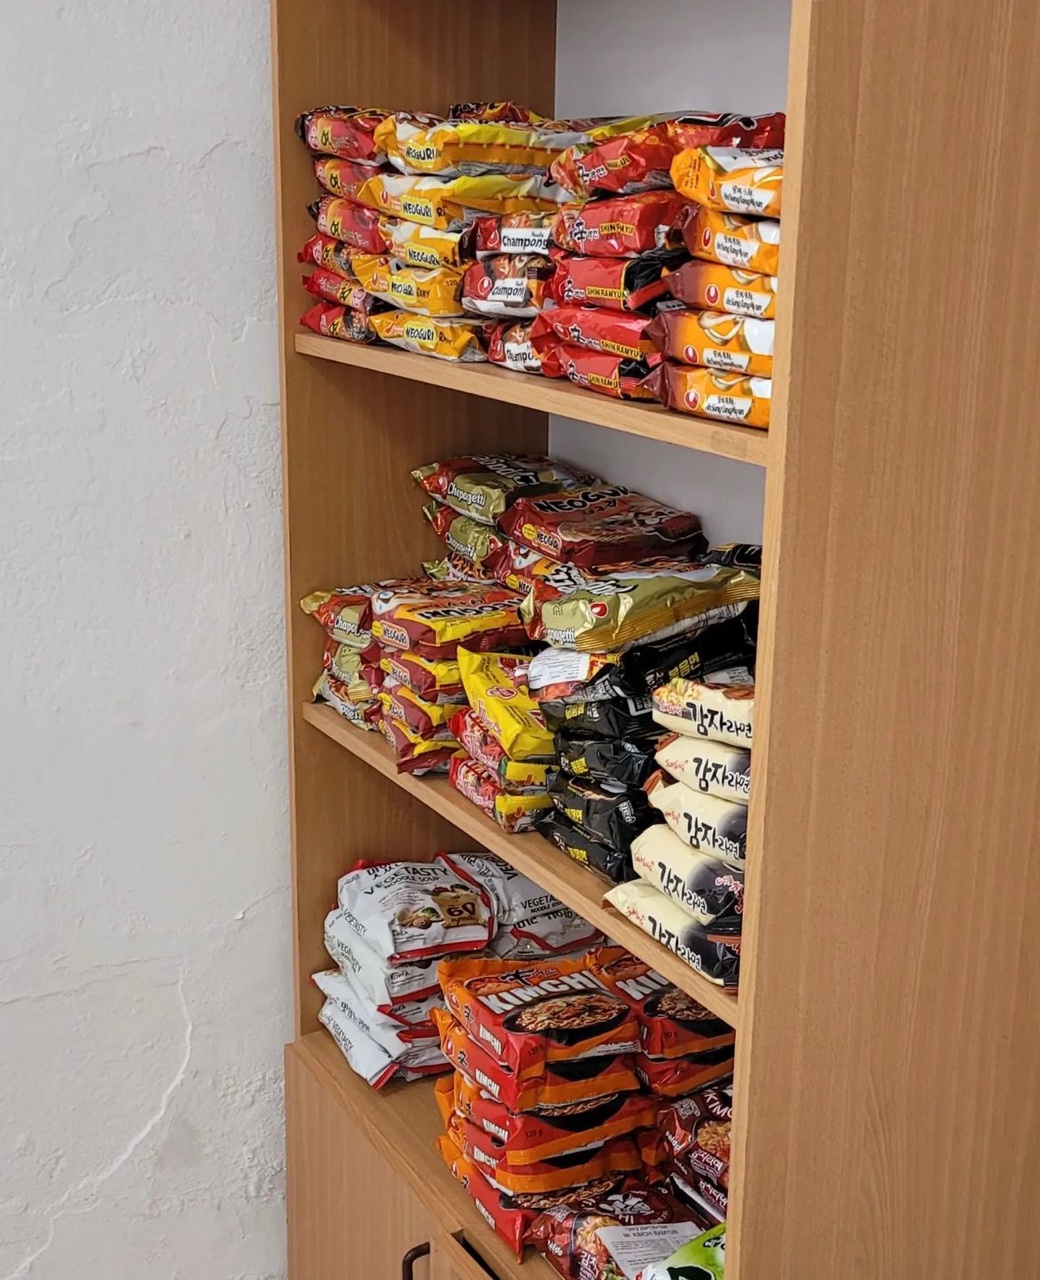 Over ten kinds of various Korean ramyeon are arranged for customers.